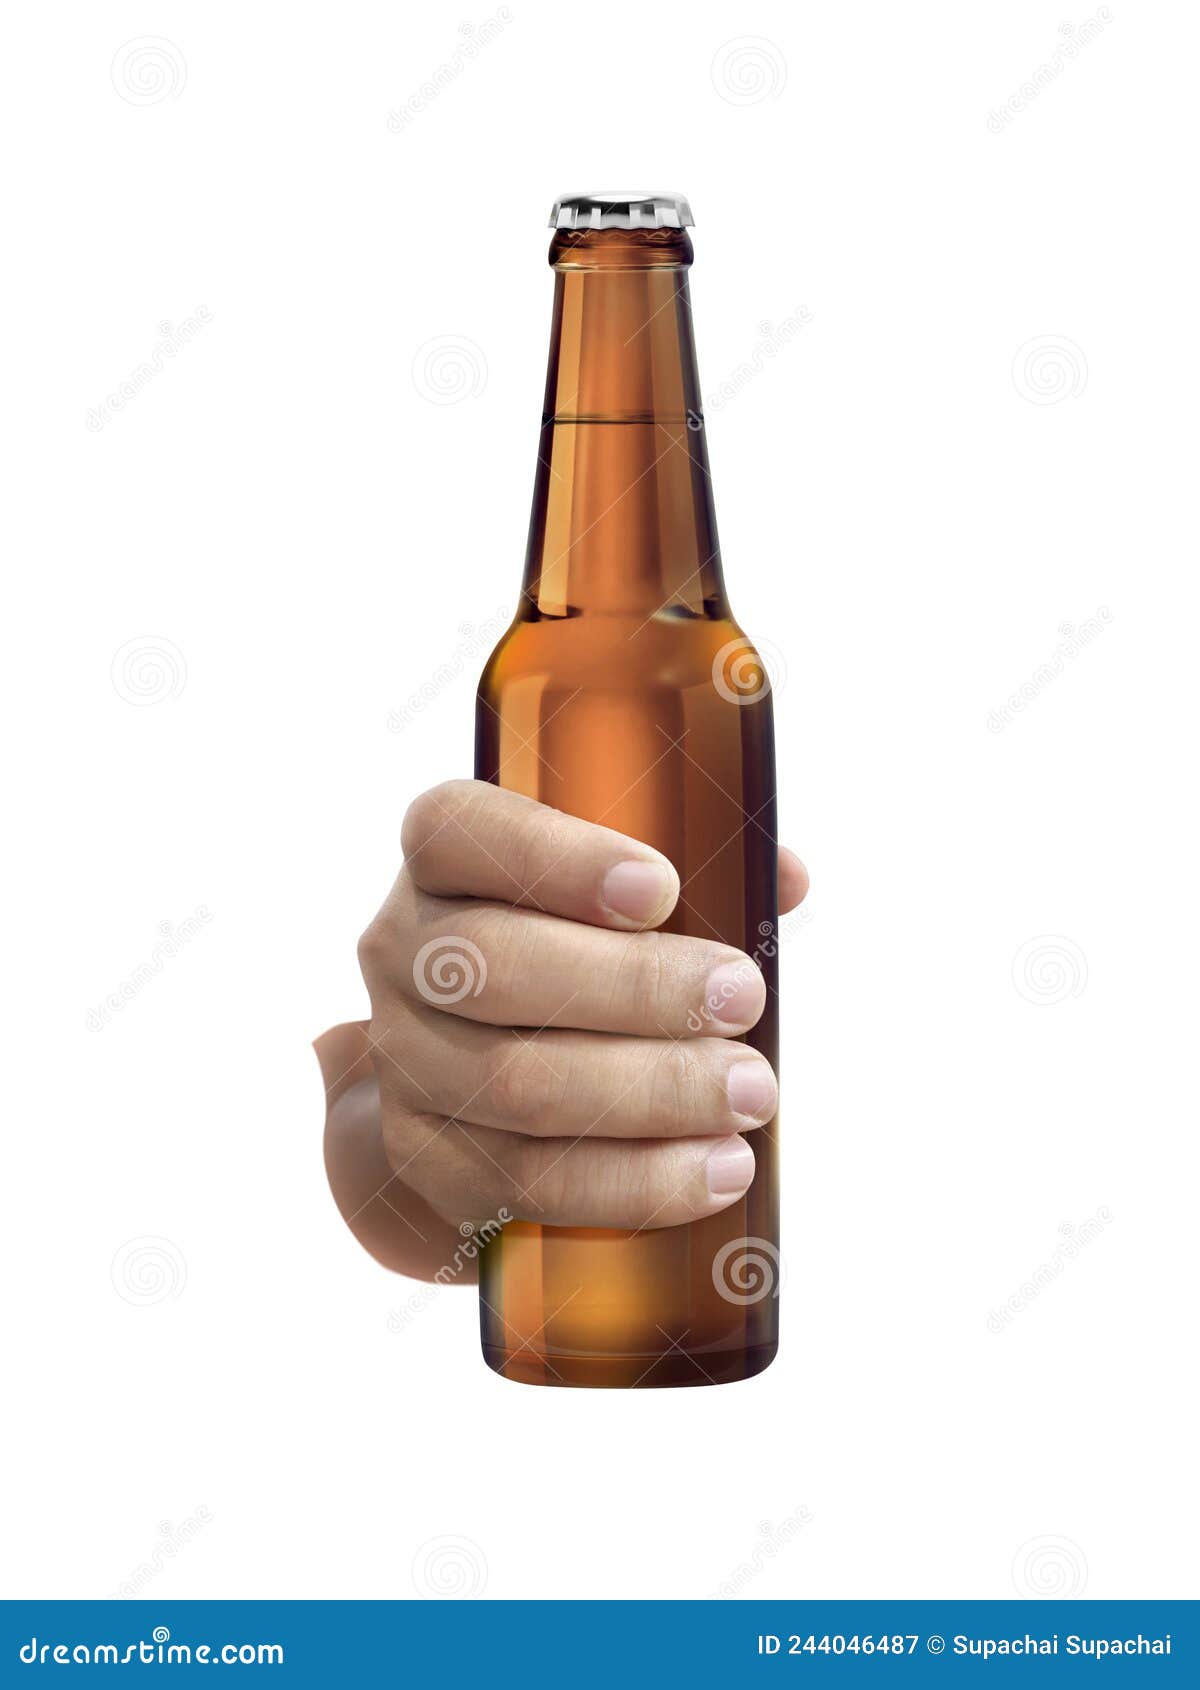 A Man Holding Beer Bottle Isolated on White Background Stock Image - Image  of hand, lifestyle: 244046487